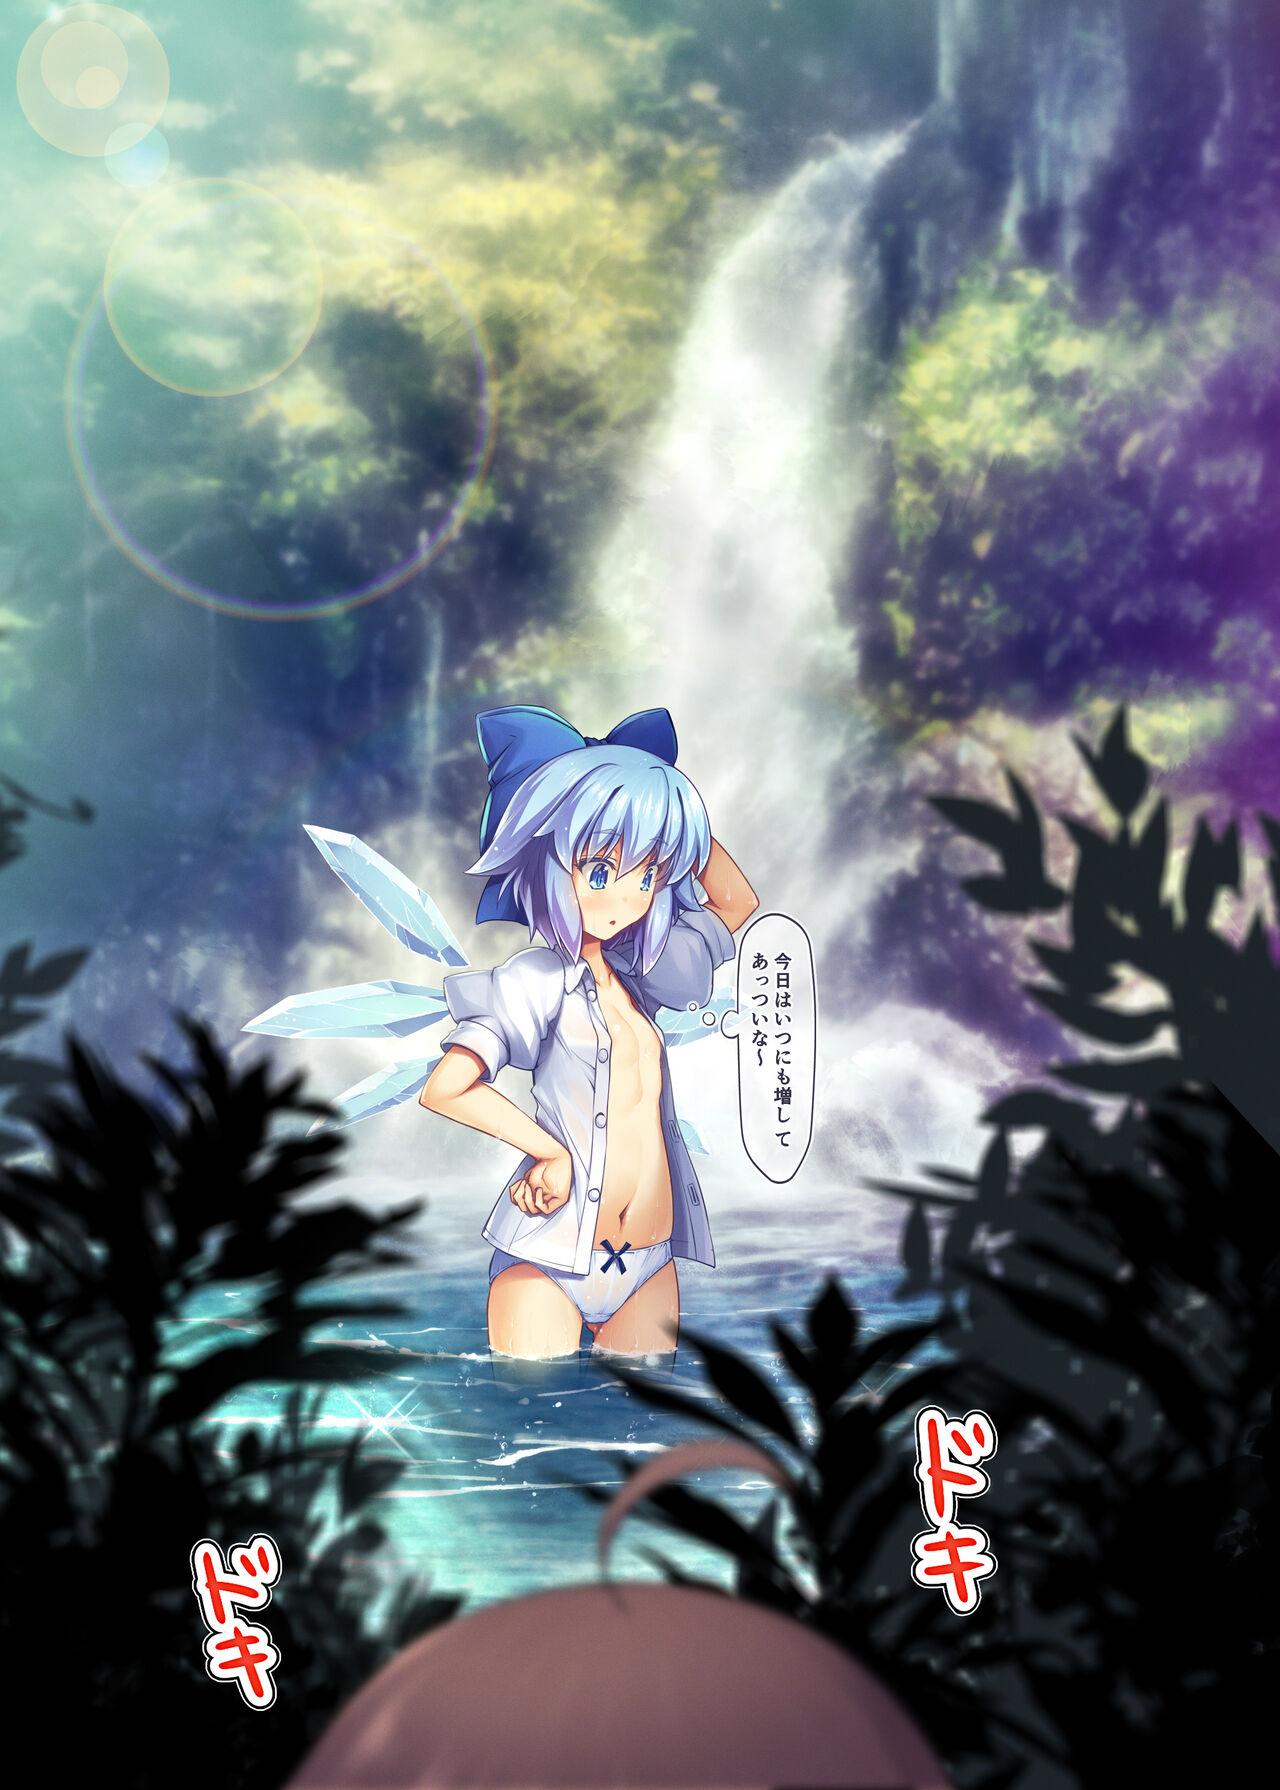 Hooker スカート捕食 - Touhou project Student - Picture 1